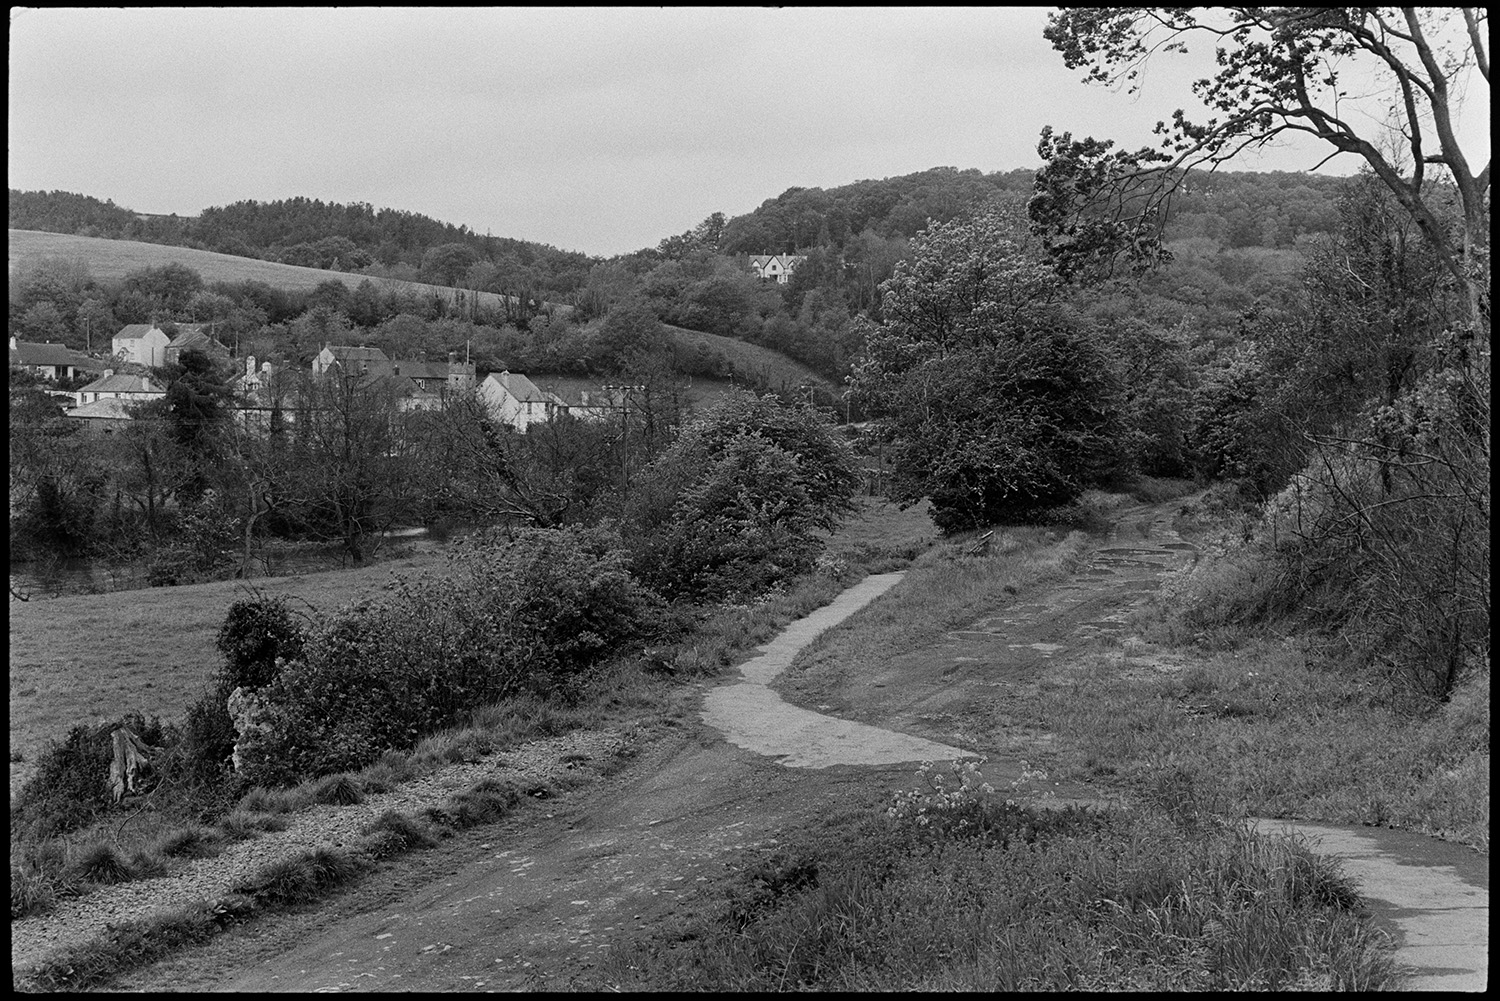 Scenes around town, comparison with old photos, railway line and station, lorries and cars, river.
[A footpath running through a field with trees by the River Torridge at Torrington. Houses can be seen on the wooded hillside in the background.]